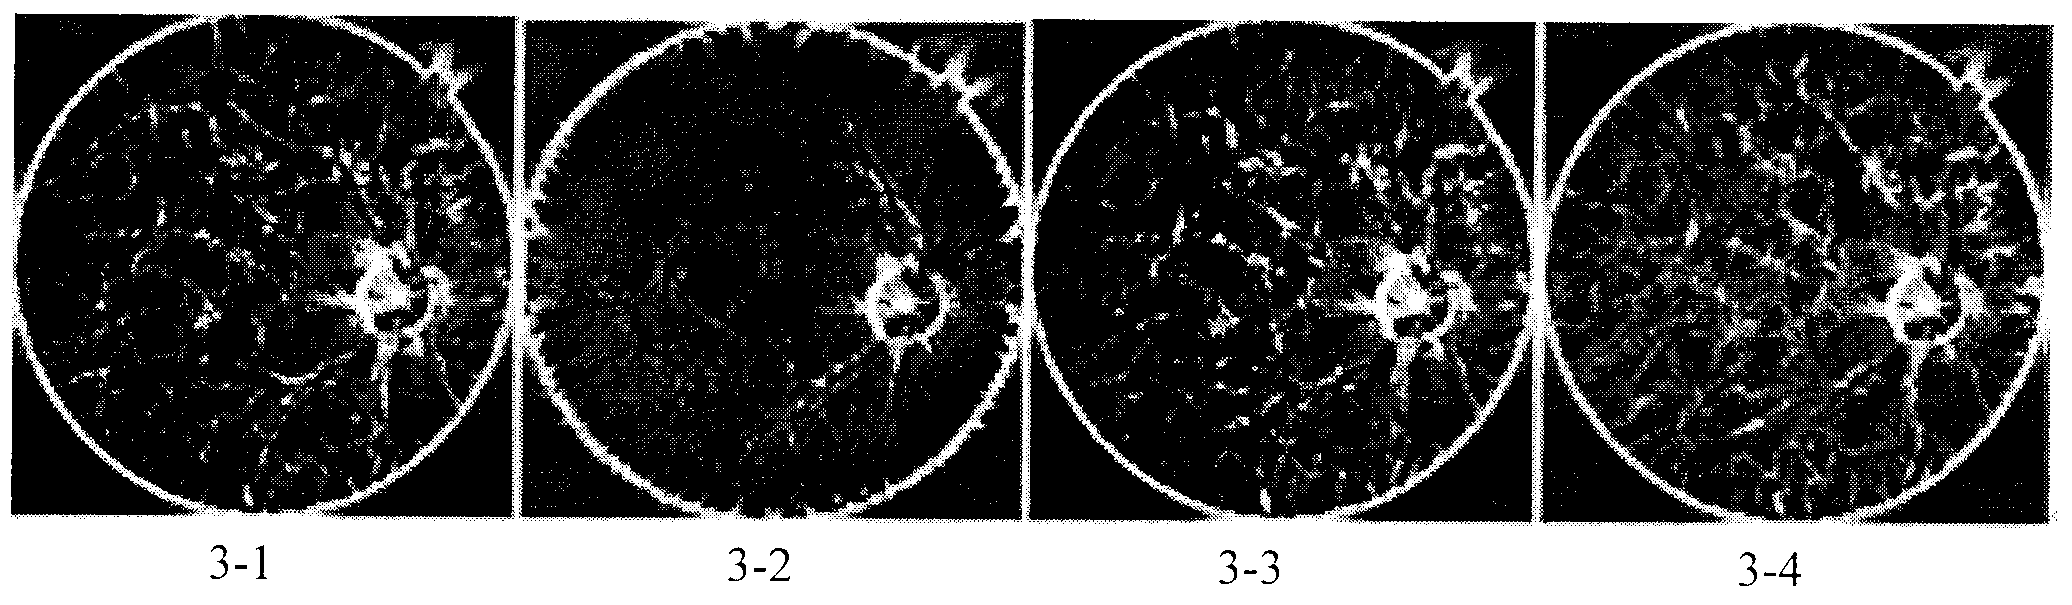 Method for positioning optic disk for eye fundus image on basis of PC (Phase Congruency)